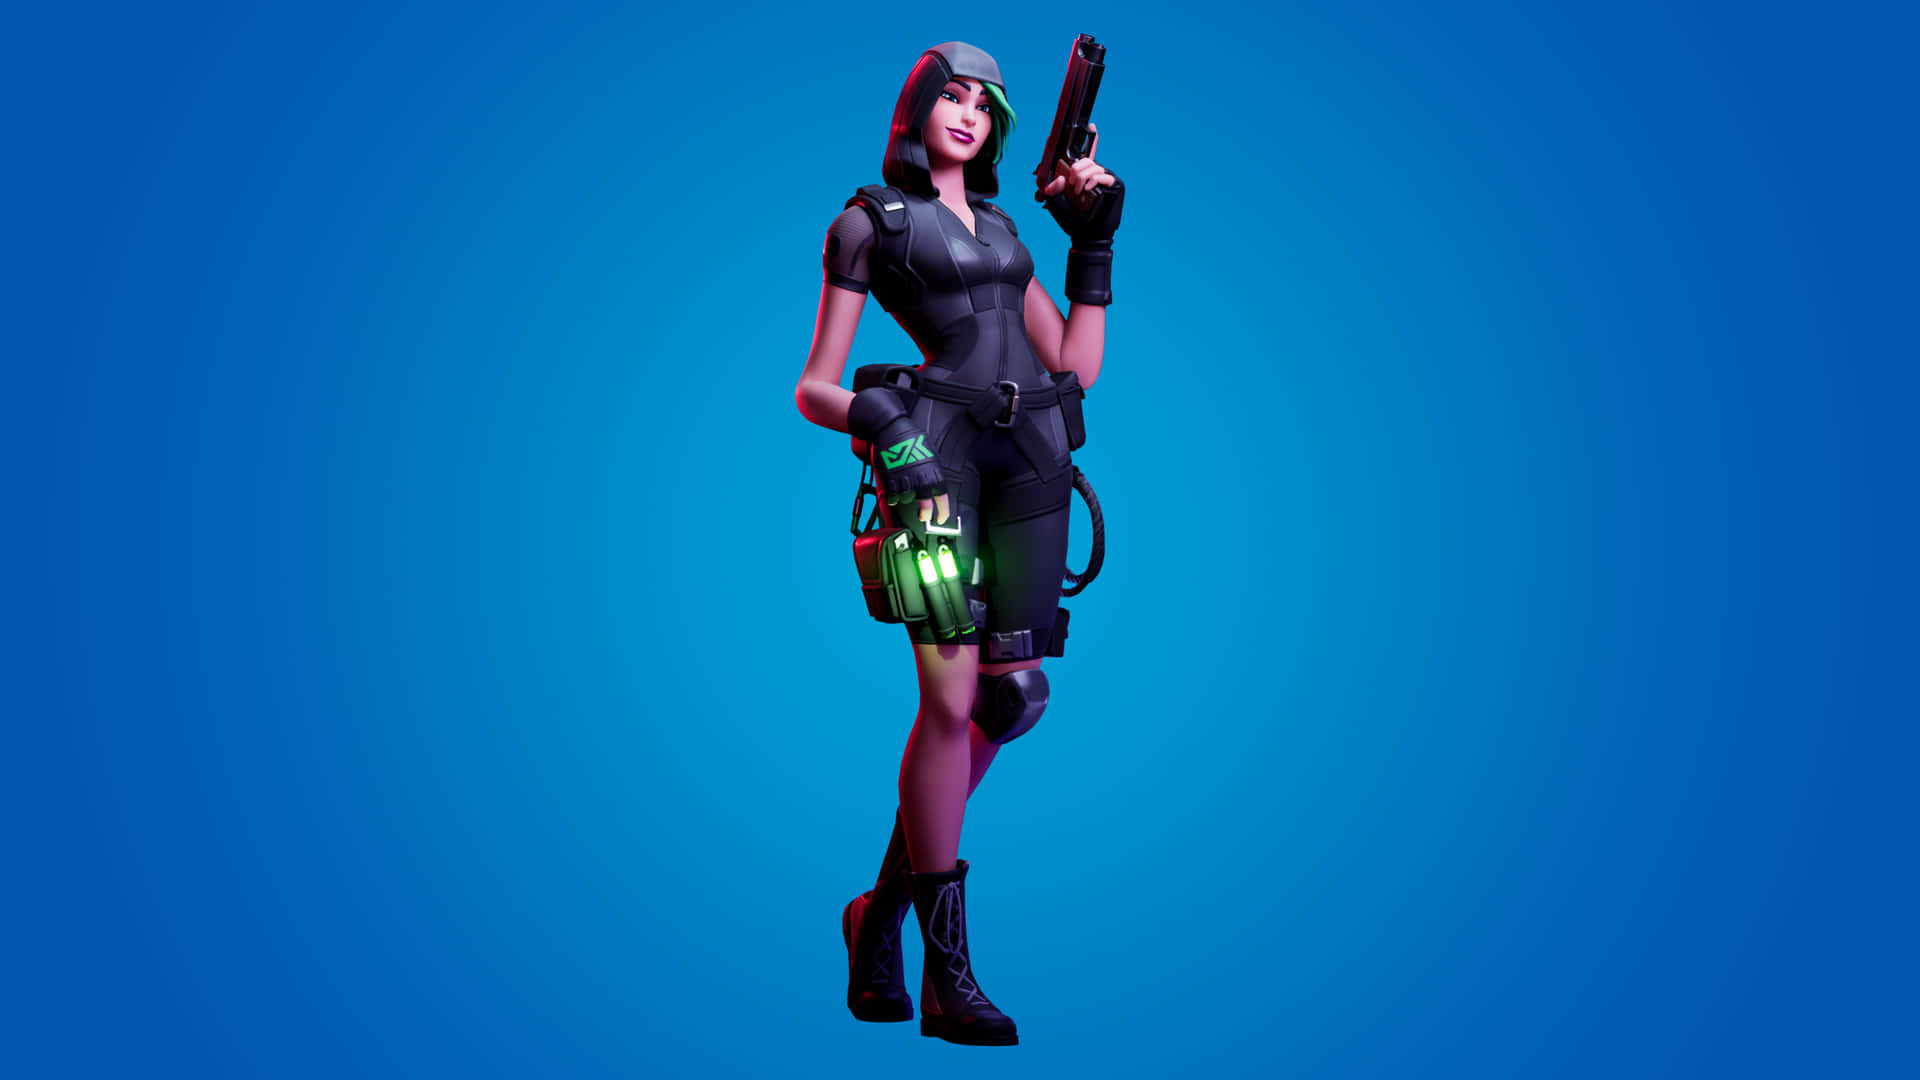 Fortnite Female Character Posewith Gunand Gadgets Wallpaper